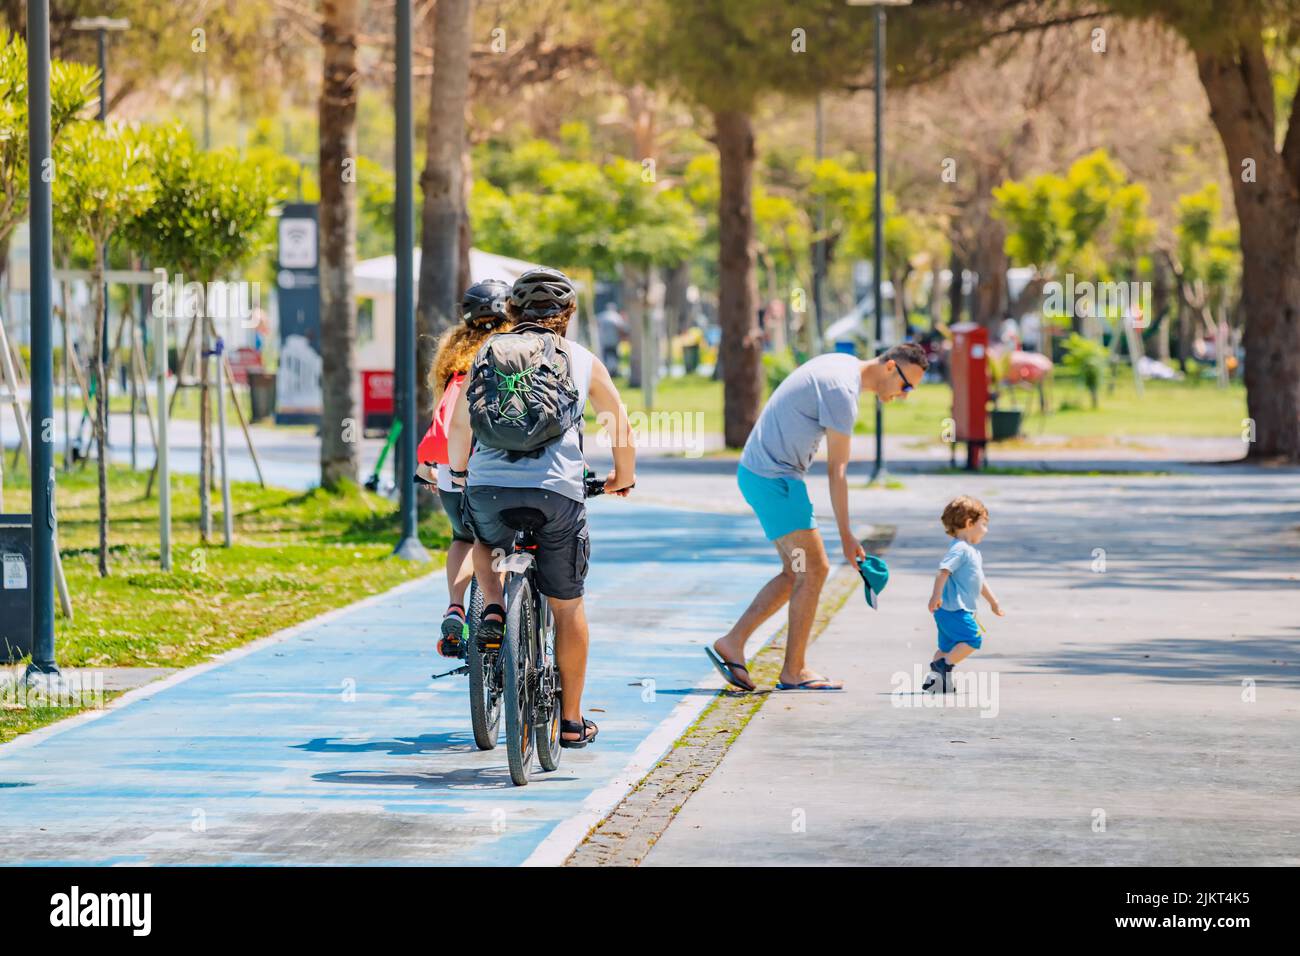 04 June 2022, Antalya, Turkey: The child ran out onto the bike path and created a dangerous and emergency situation Stock Photo